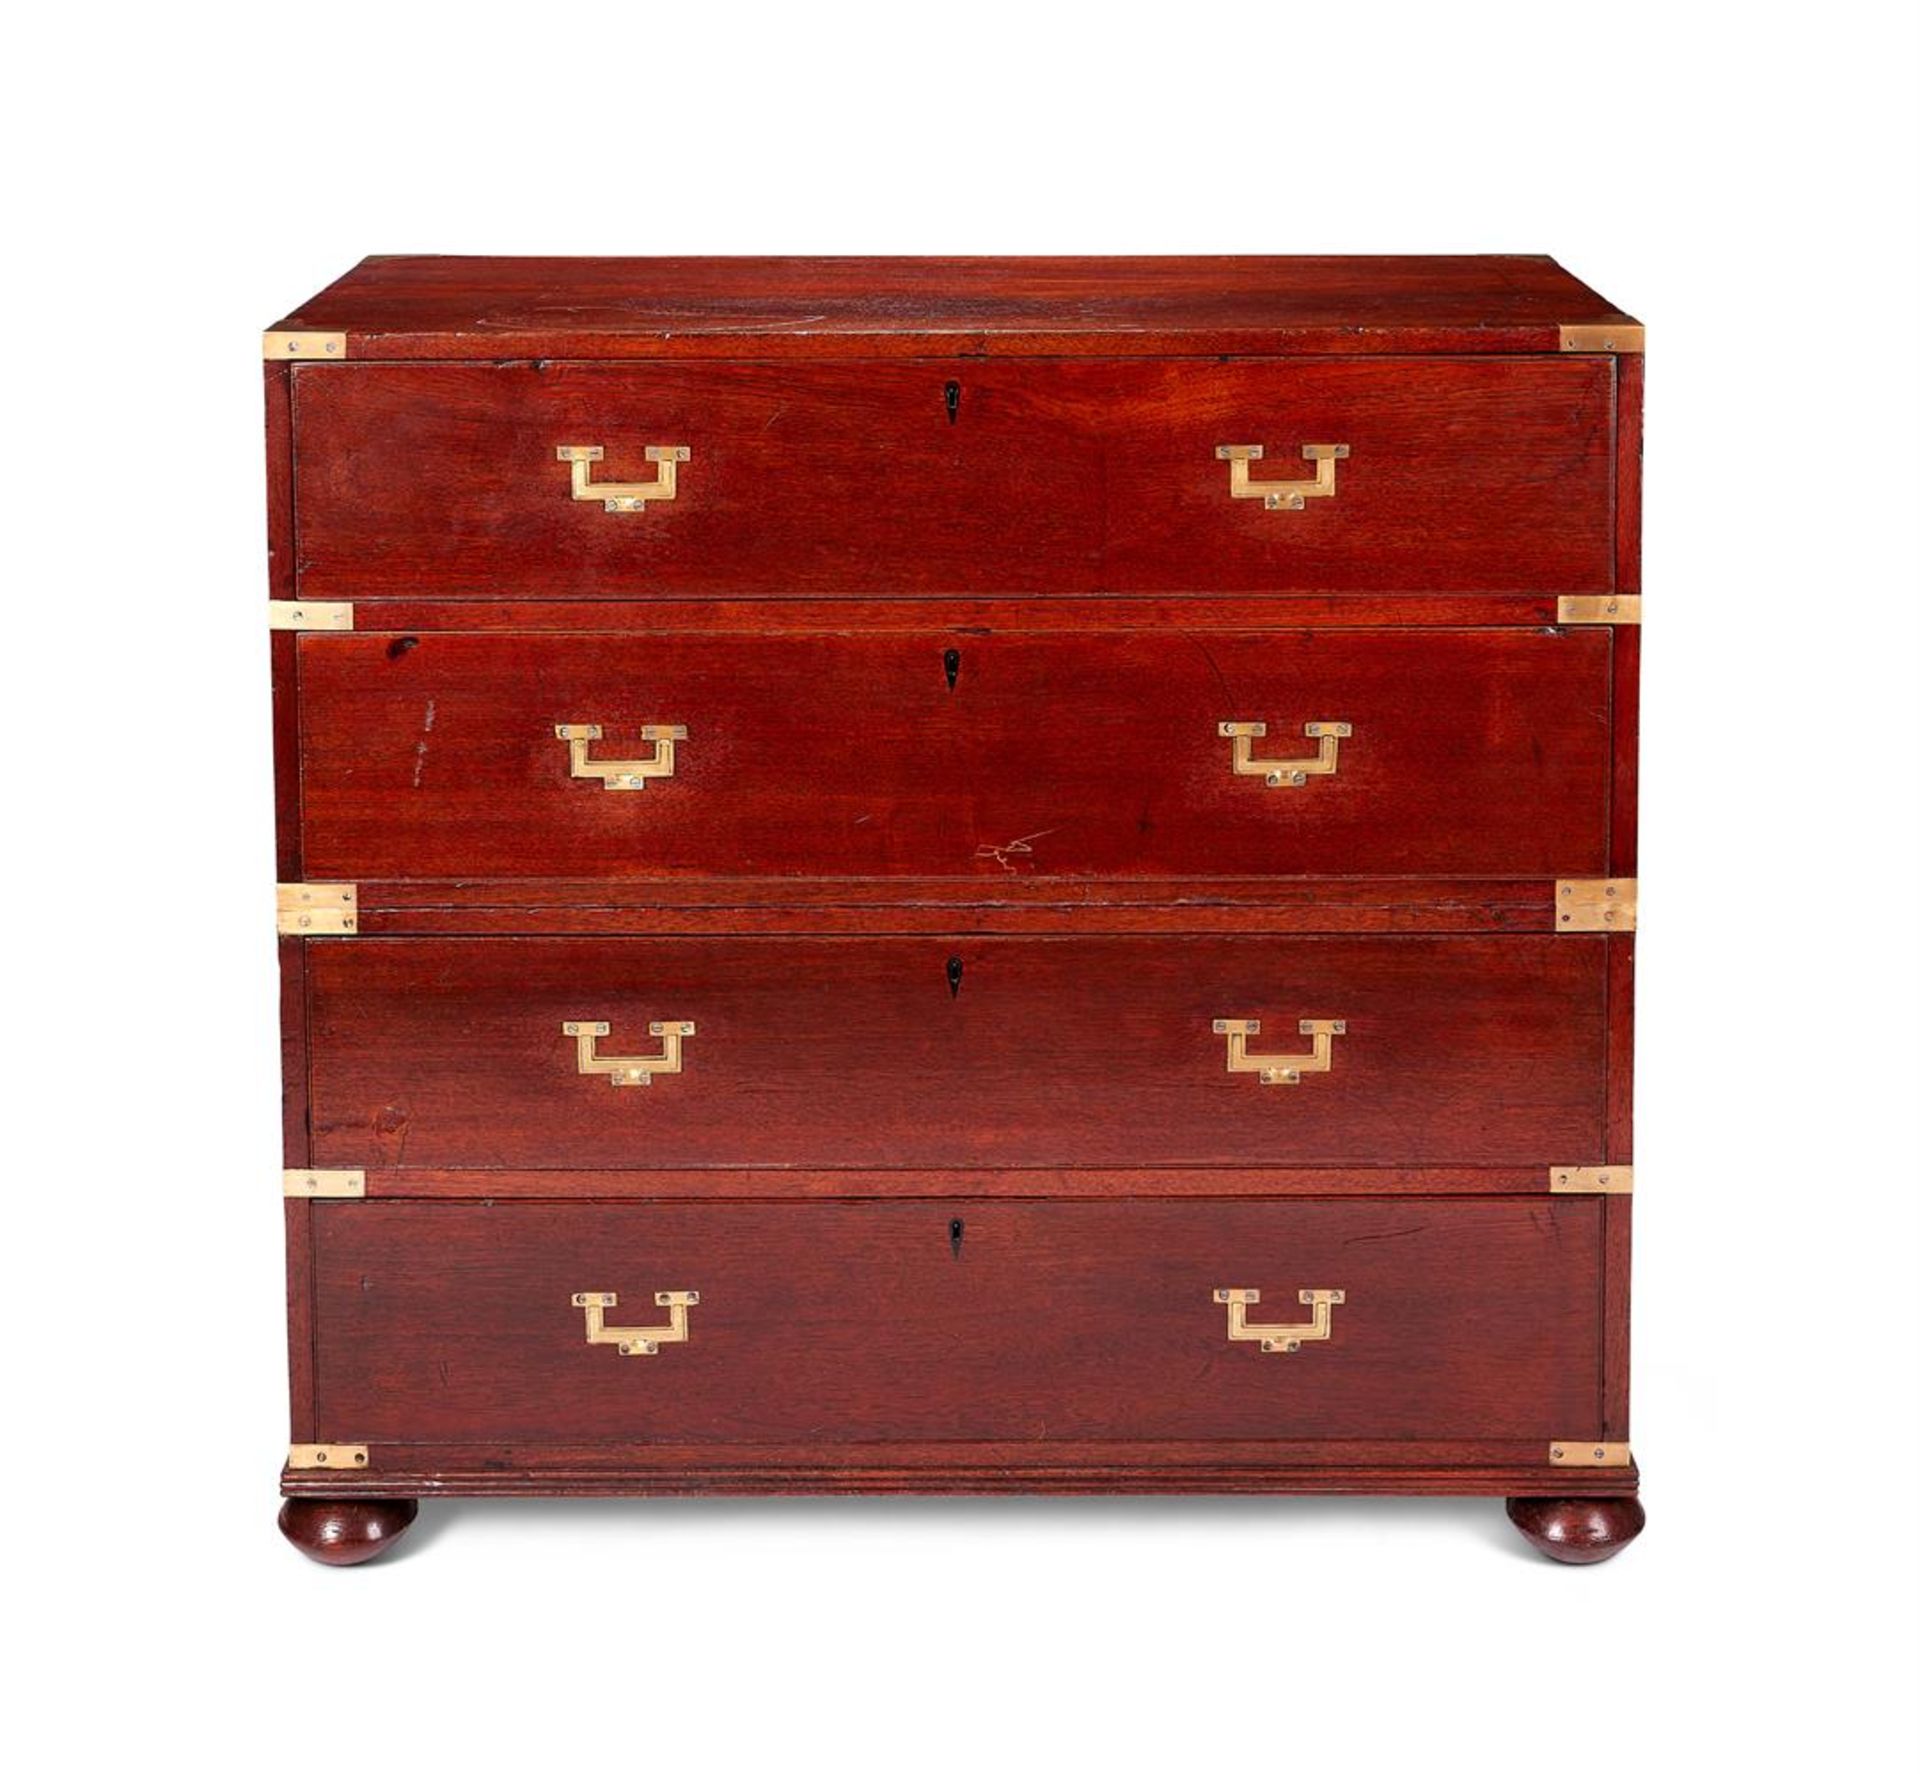 AN EARLY VICTORIAN TEAK AND BRASS MOUNTED CAMPAIGN CHEST OF DRAWERS, MID 19TH CENTURY - Image 2 of 2